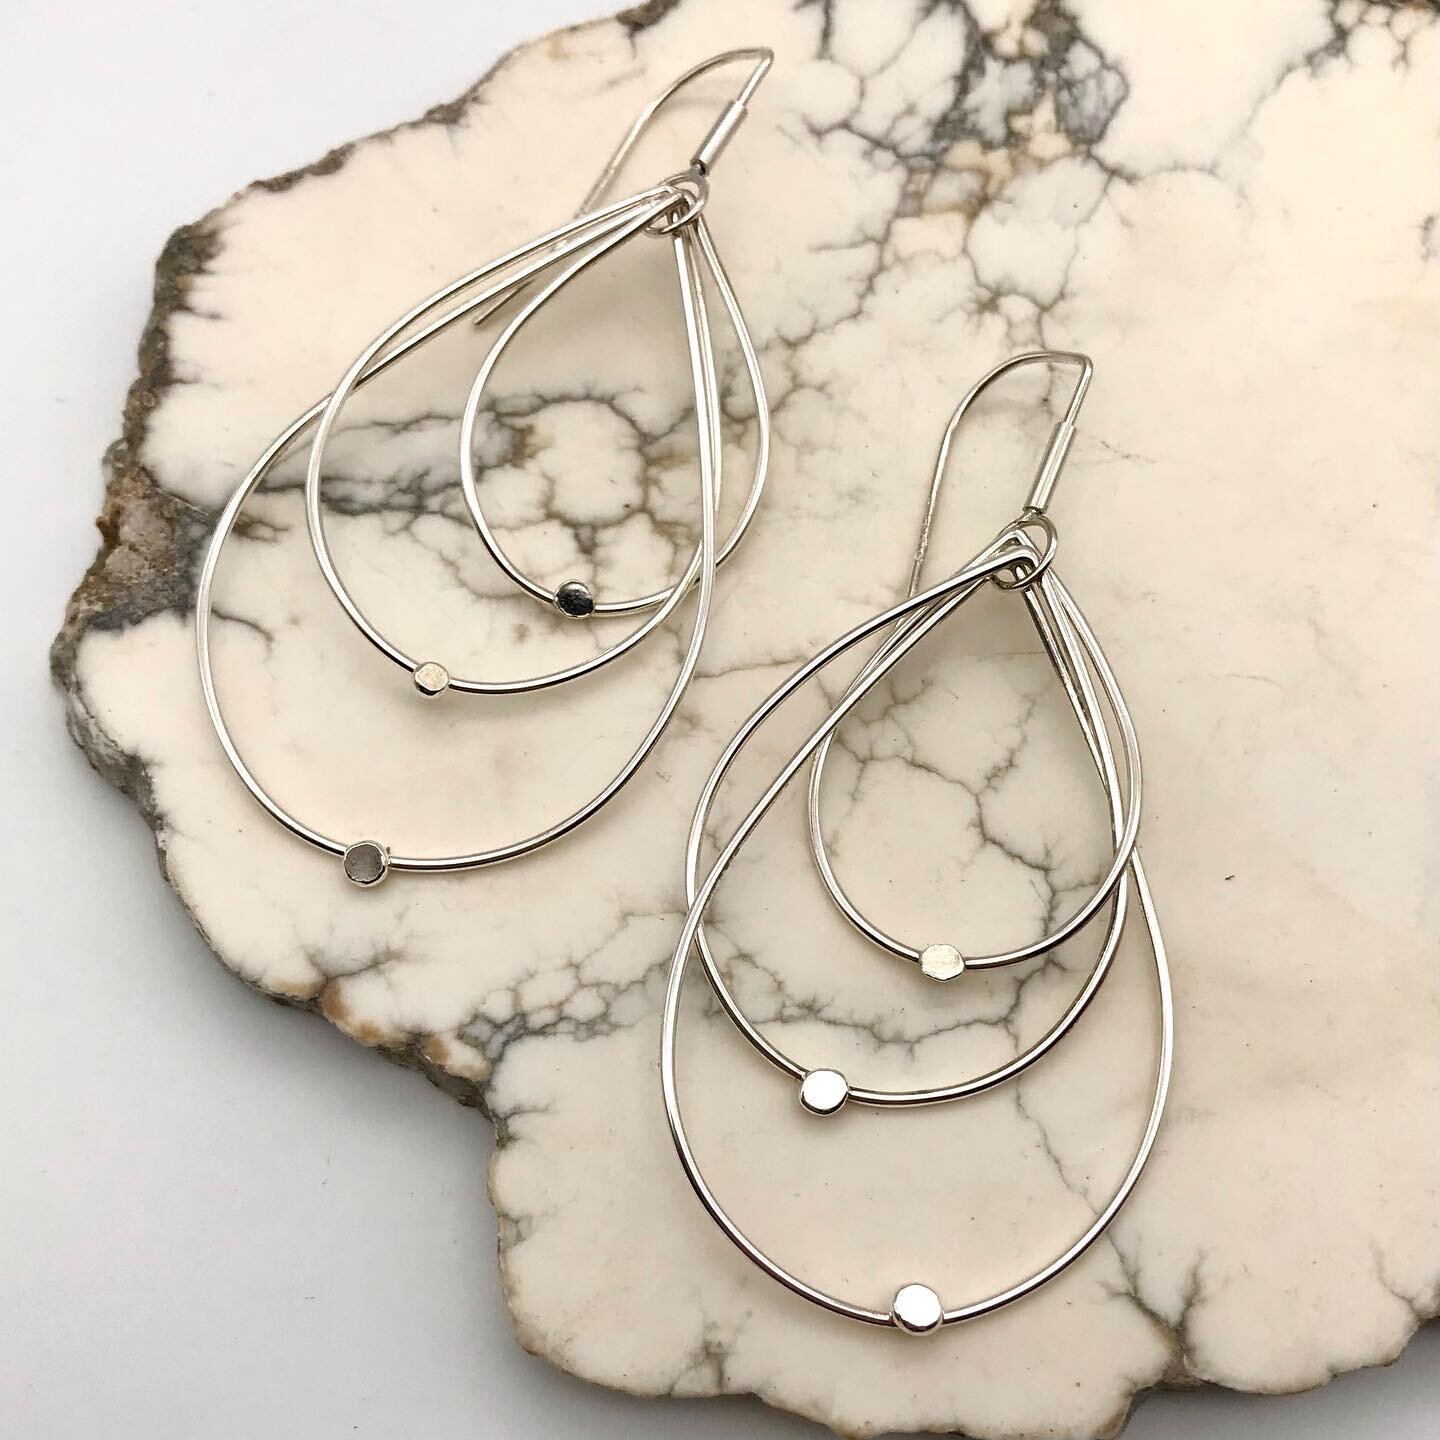 It&rsquo;s getting warmer which is perfect weather for big hoops! Yay! #hoopearrings #sustainablejewelry #recycledsterlingsilver #handmade #megtangjewelry www.megtang.com